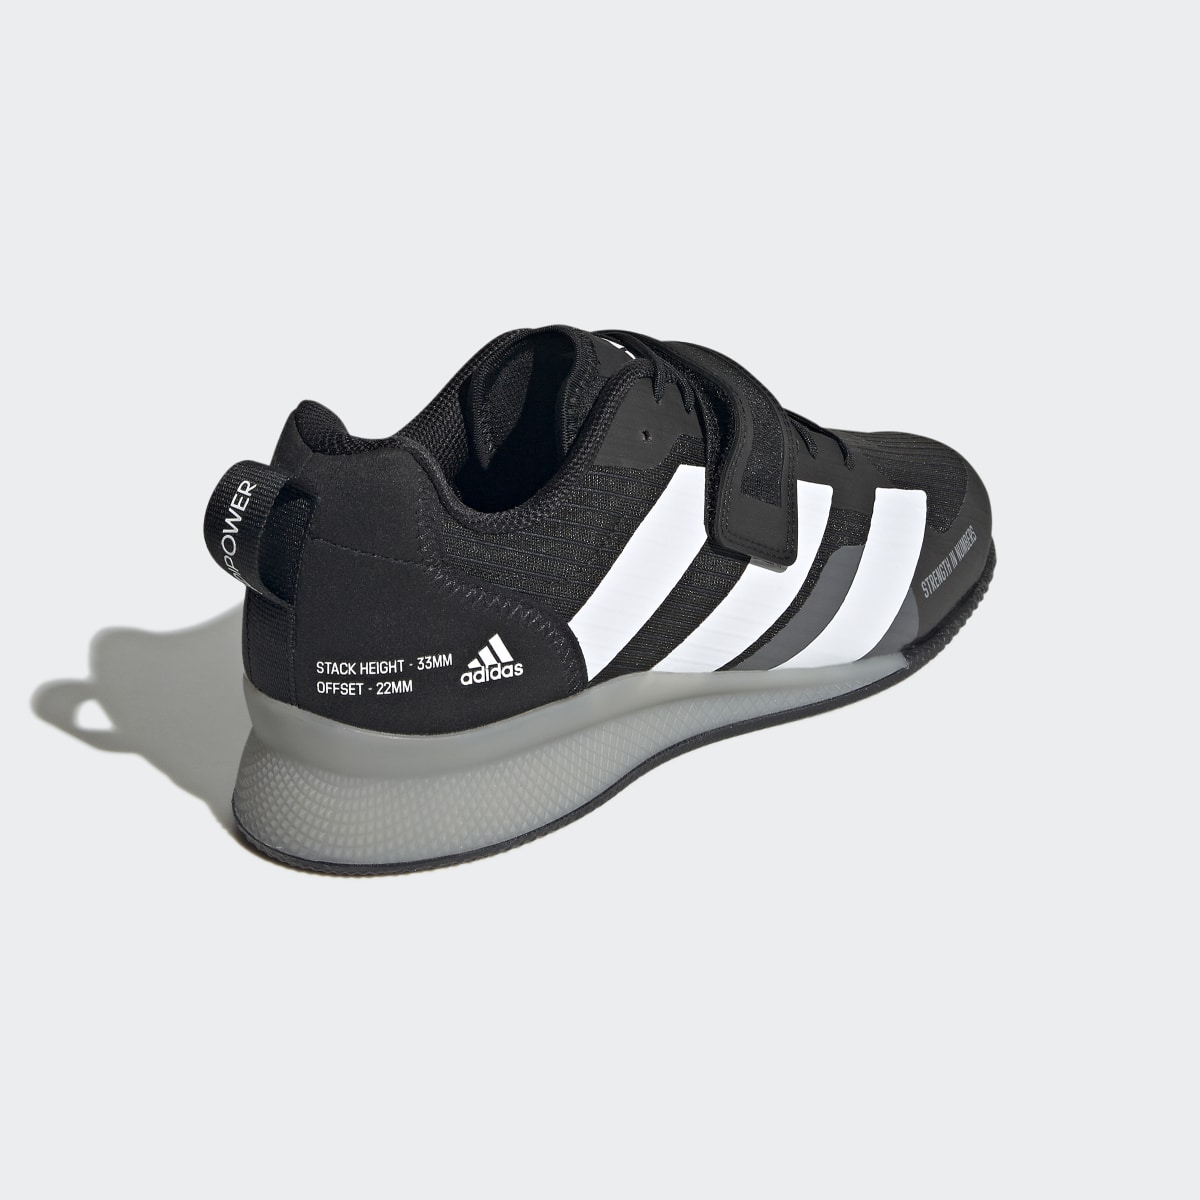 Adidas Adipower Weightlifting 3 Shoes. 6